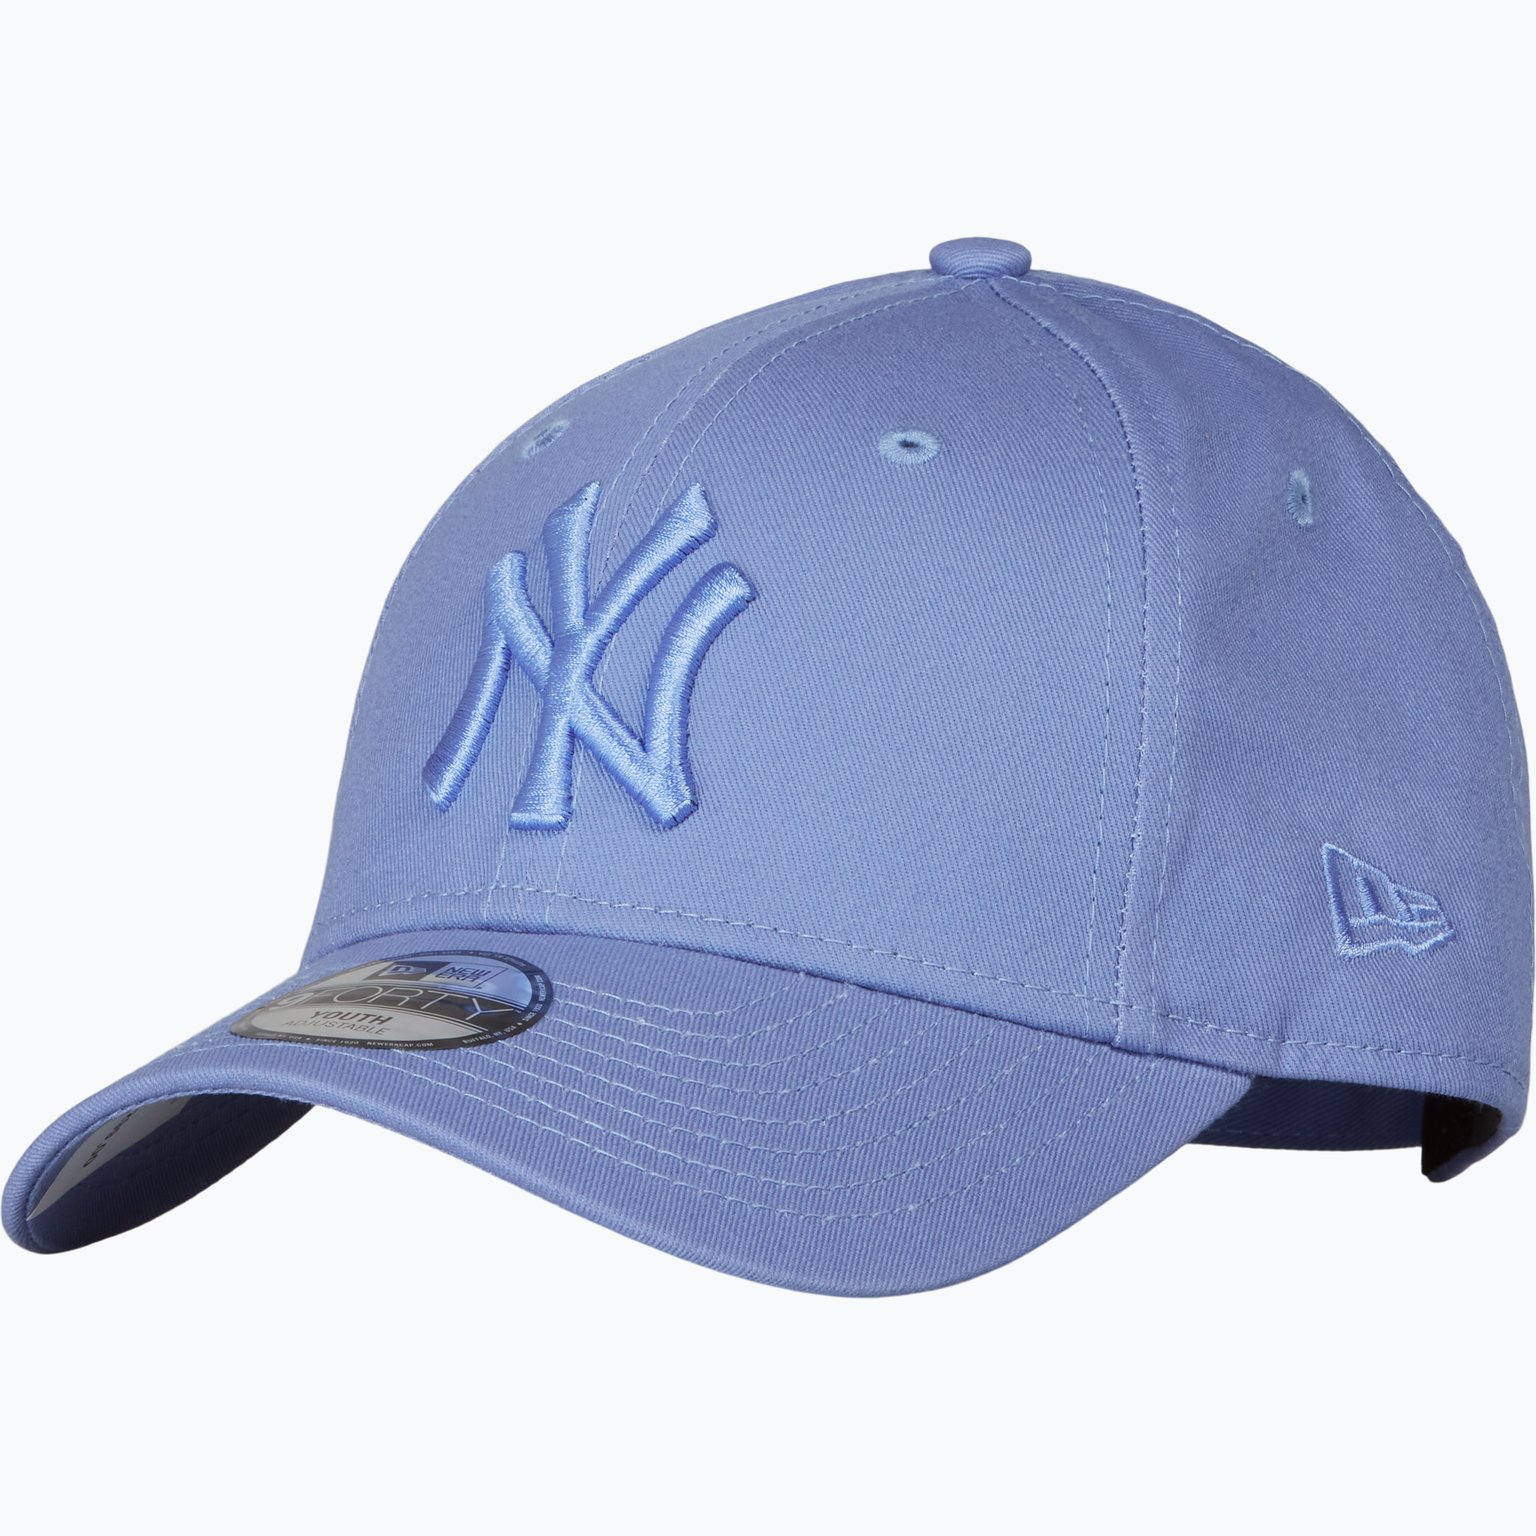 9FORTY New York Yankees League Essential JR keps